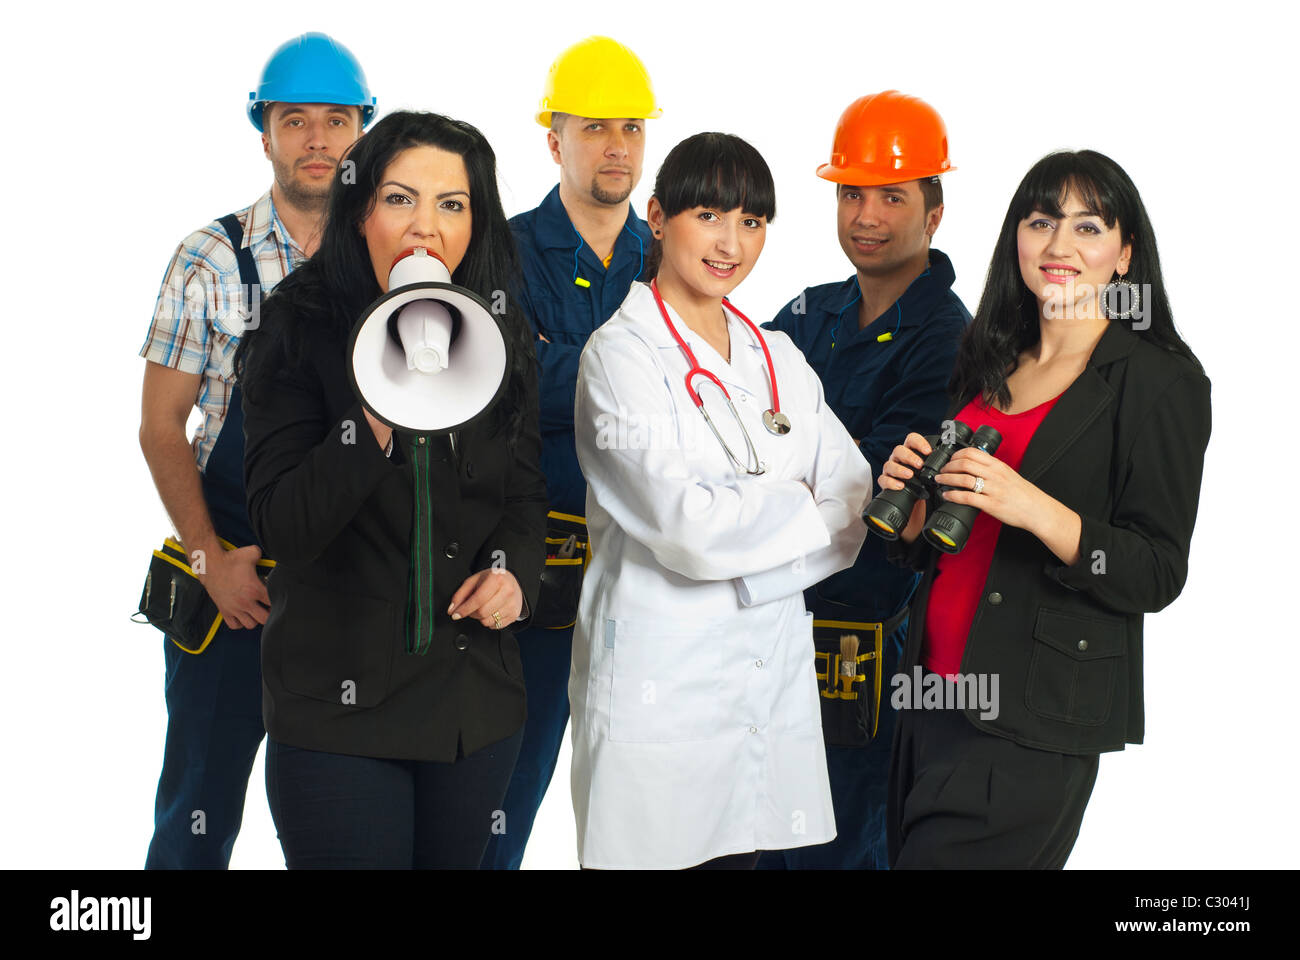 Business woman together with group of people with different careers make an announcement Stock Photo